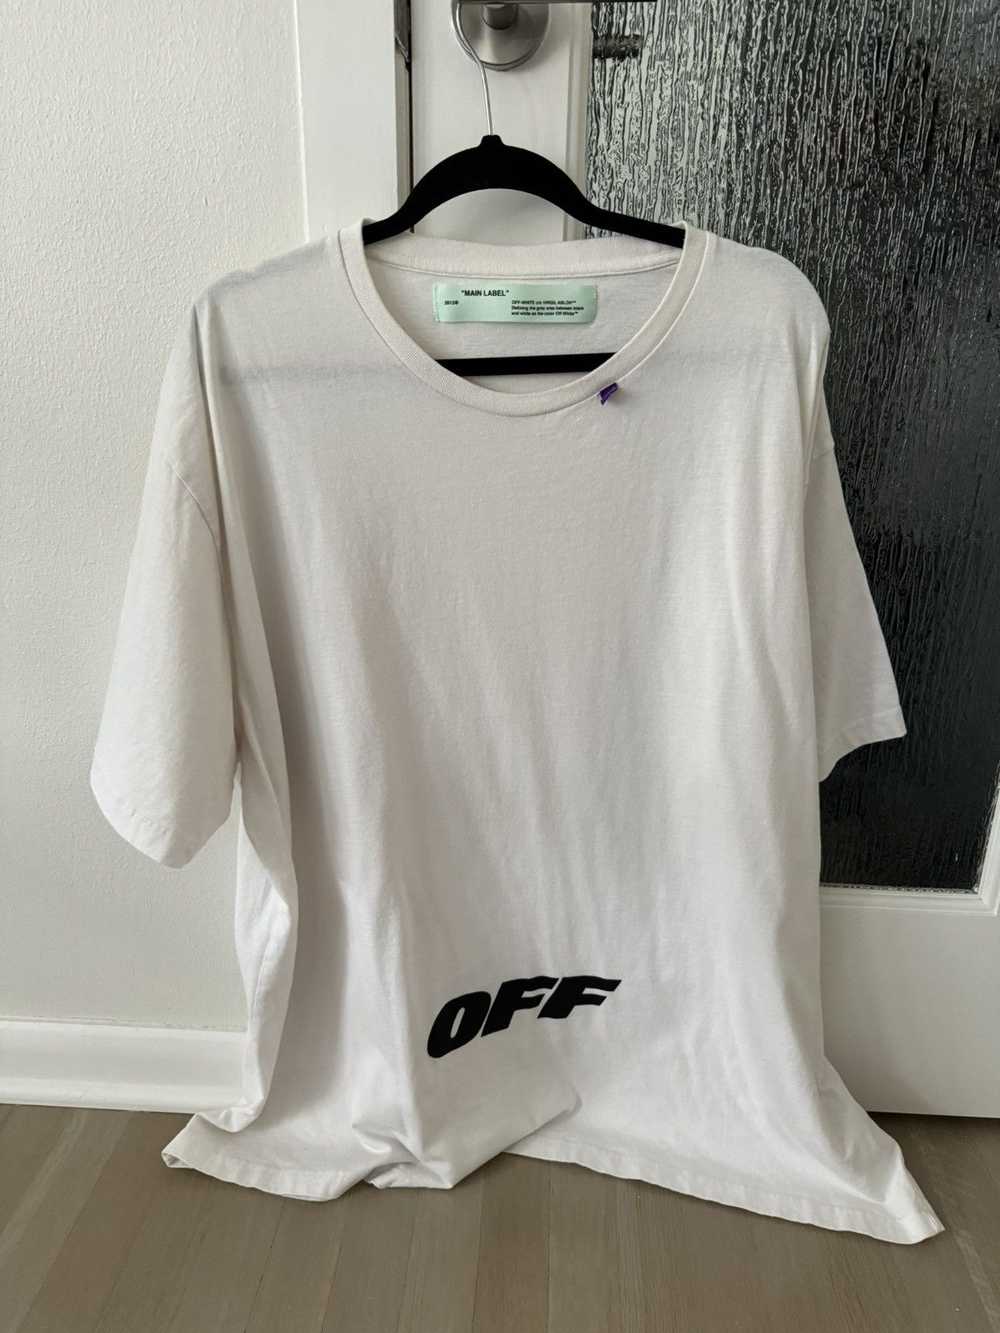 Off-White Off-White ‘Wing Off’ Tee - image 2